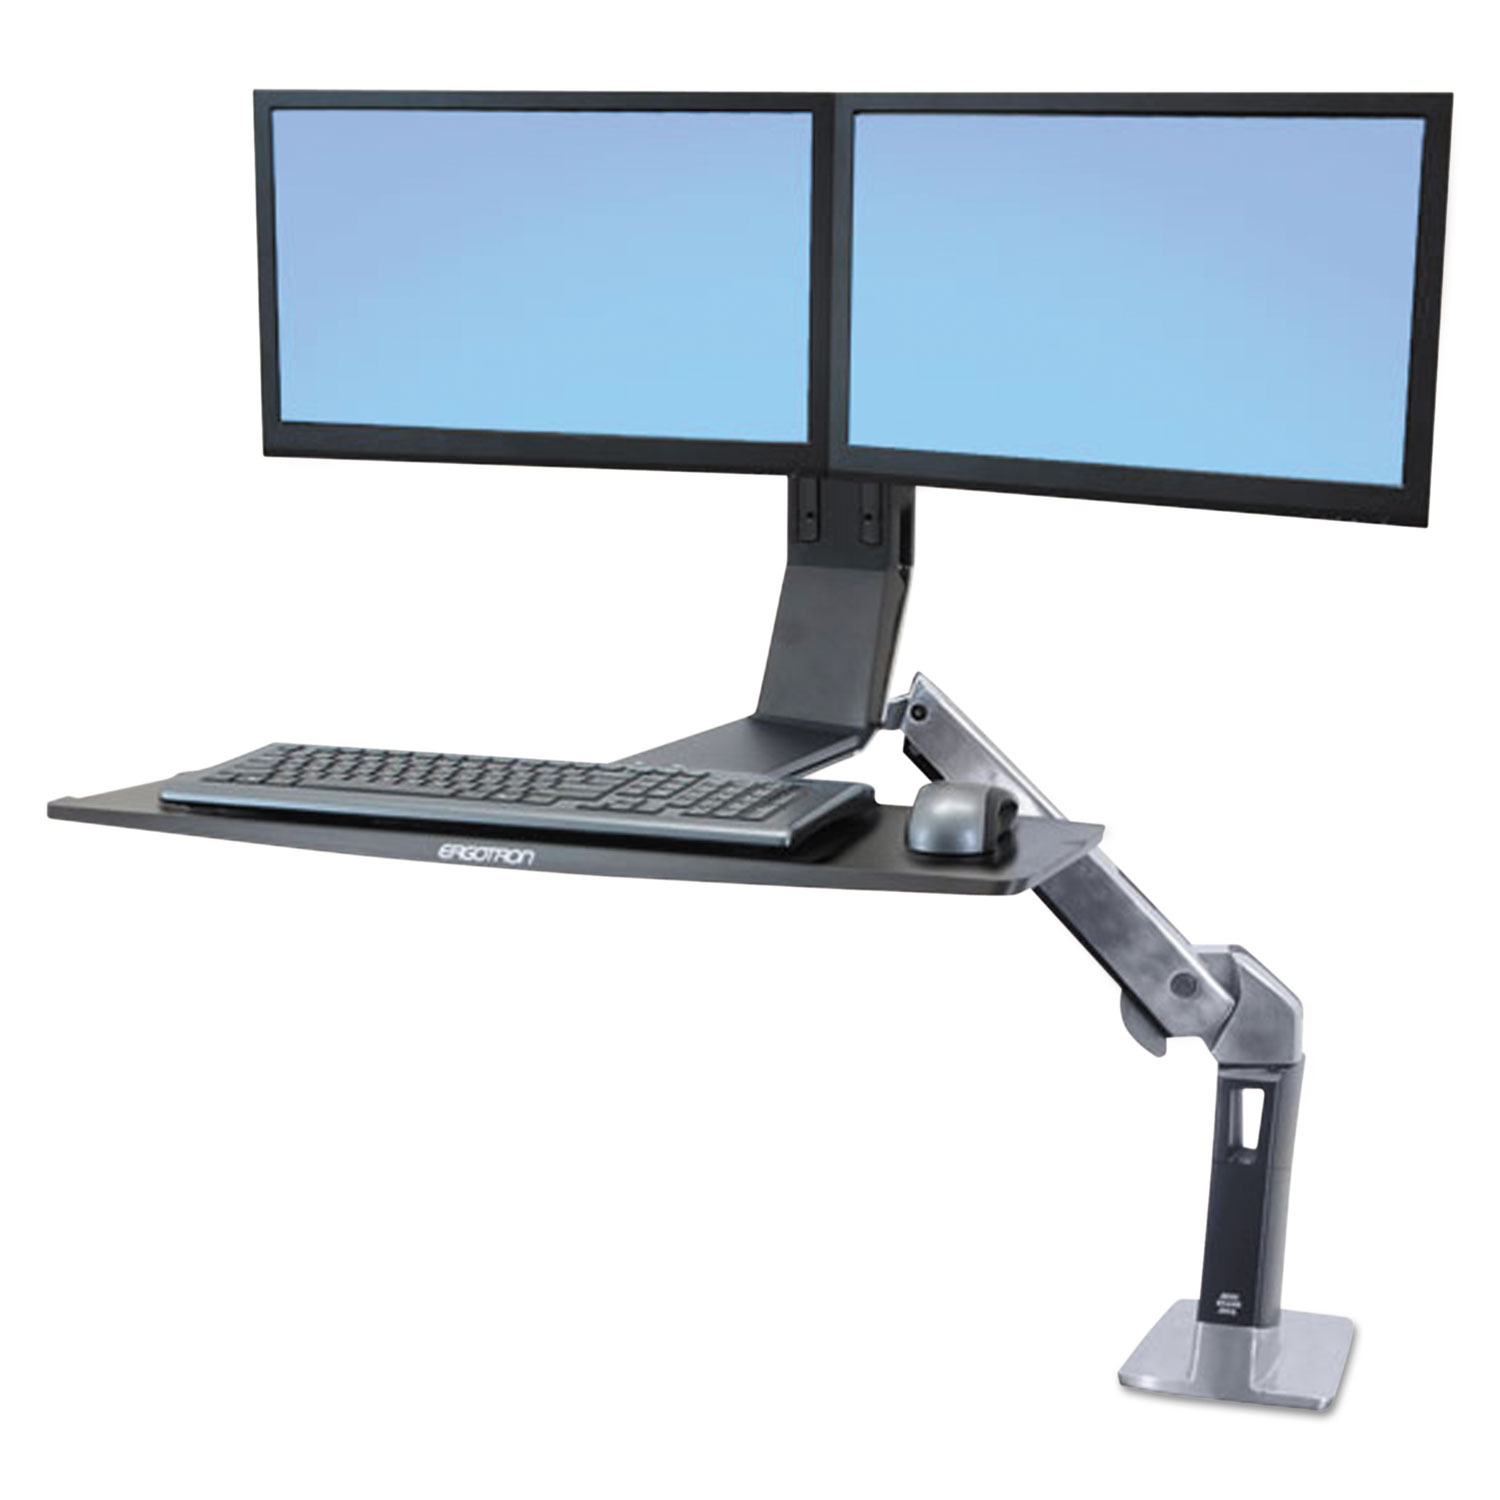 WorkFit-A Sit-Stand Workstation, Dual LCD Monitors, Polished Aluminum/Black